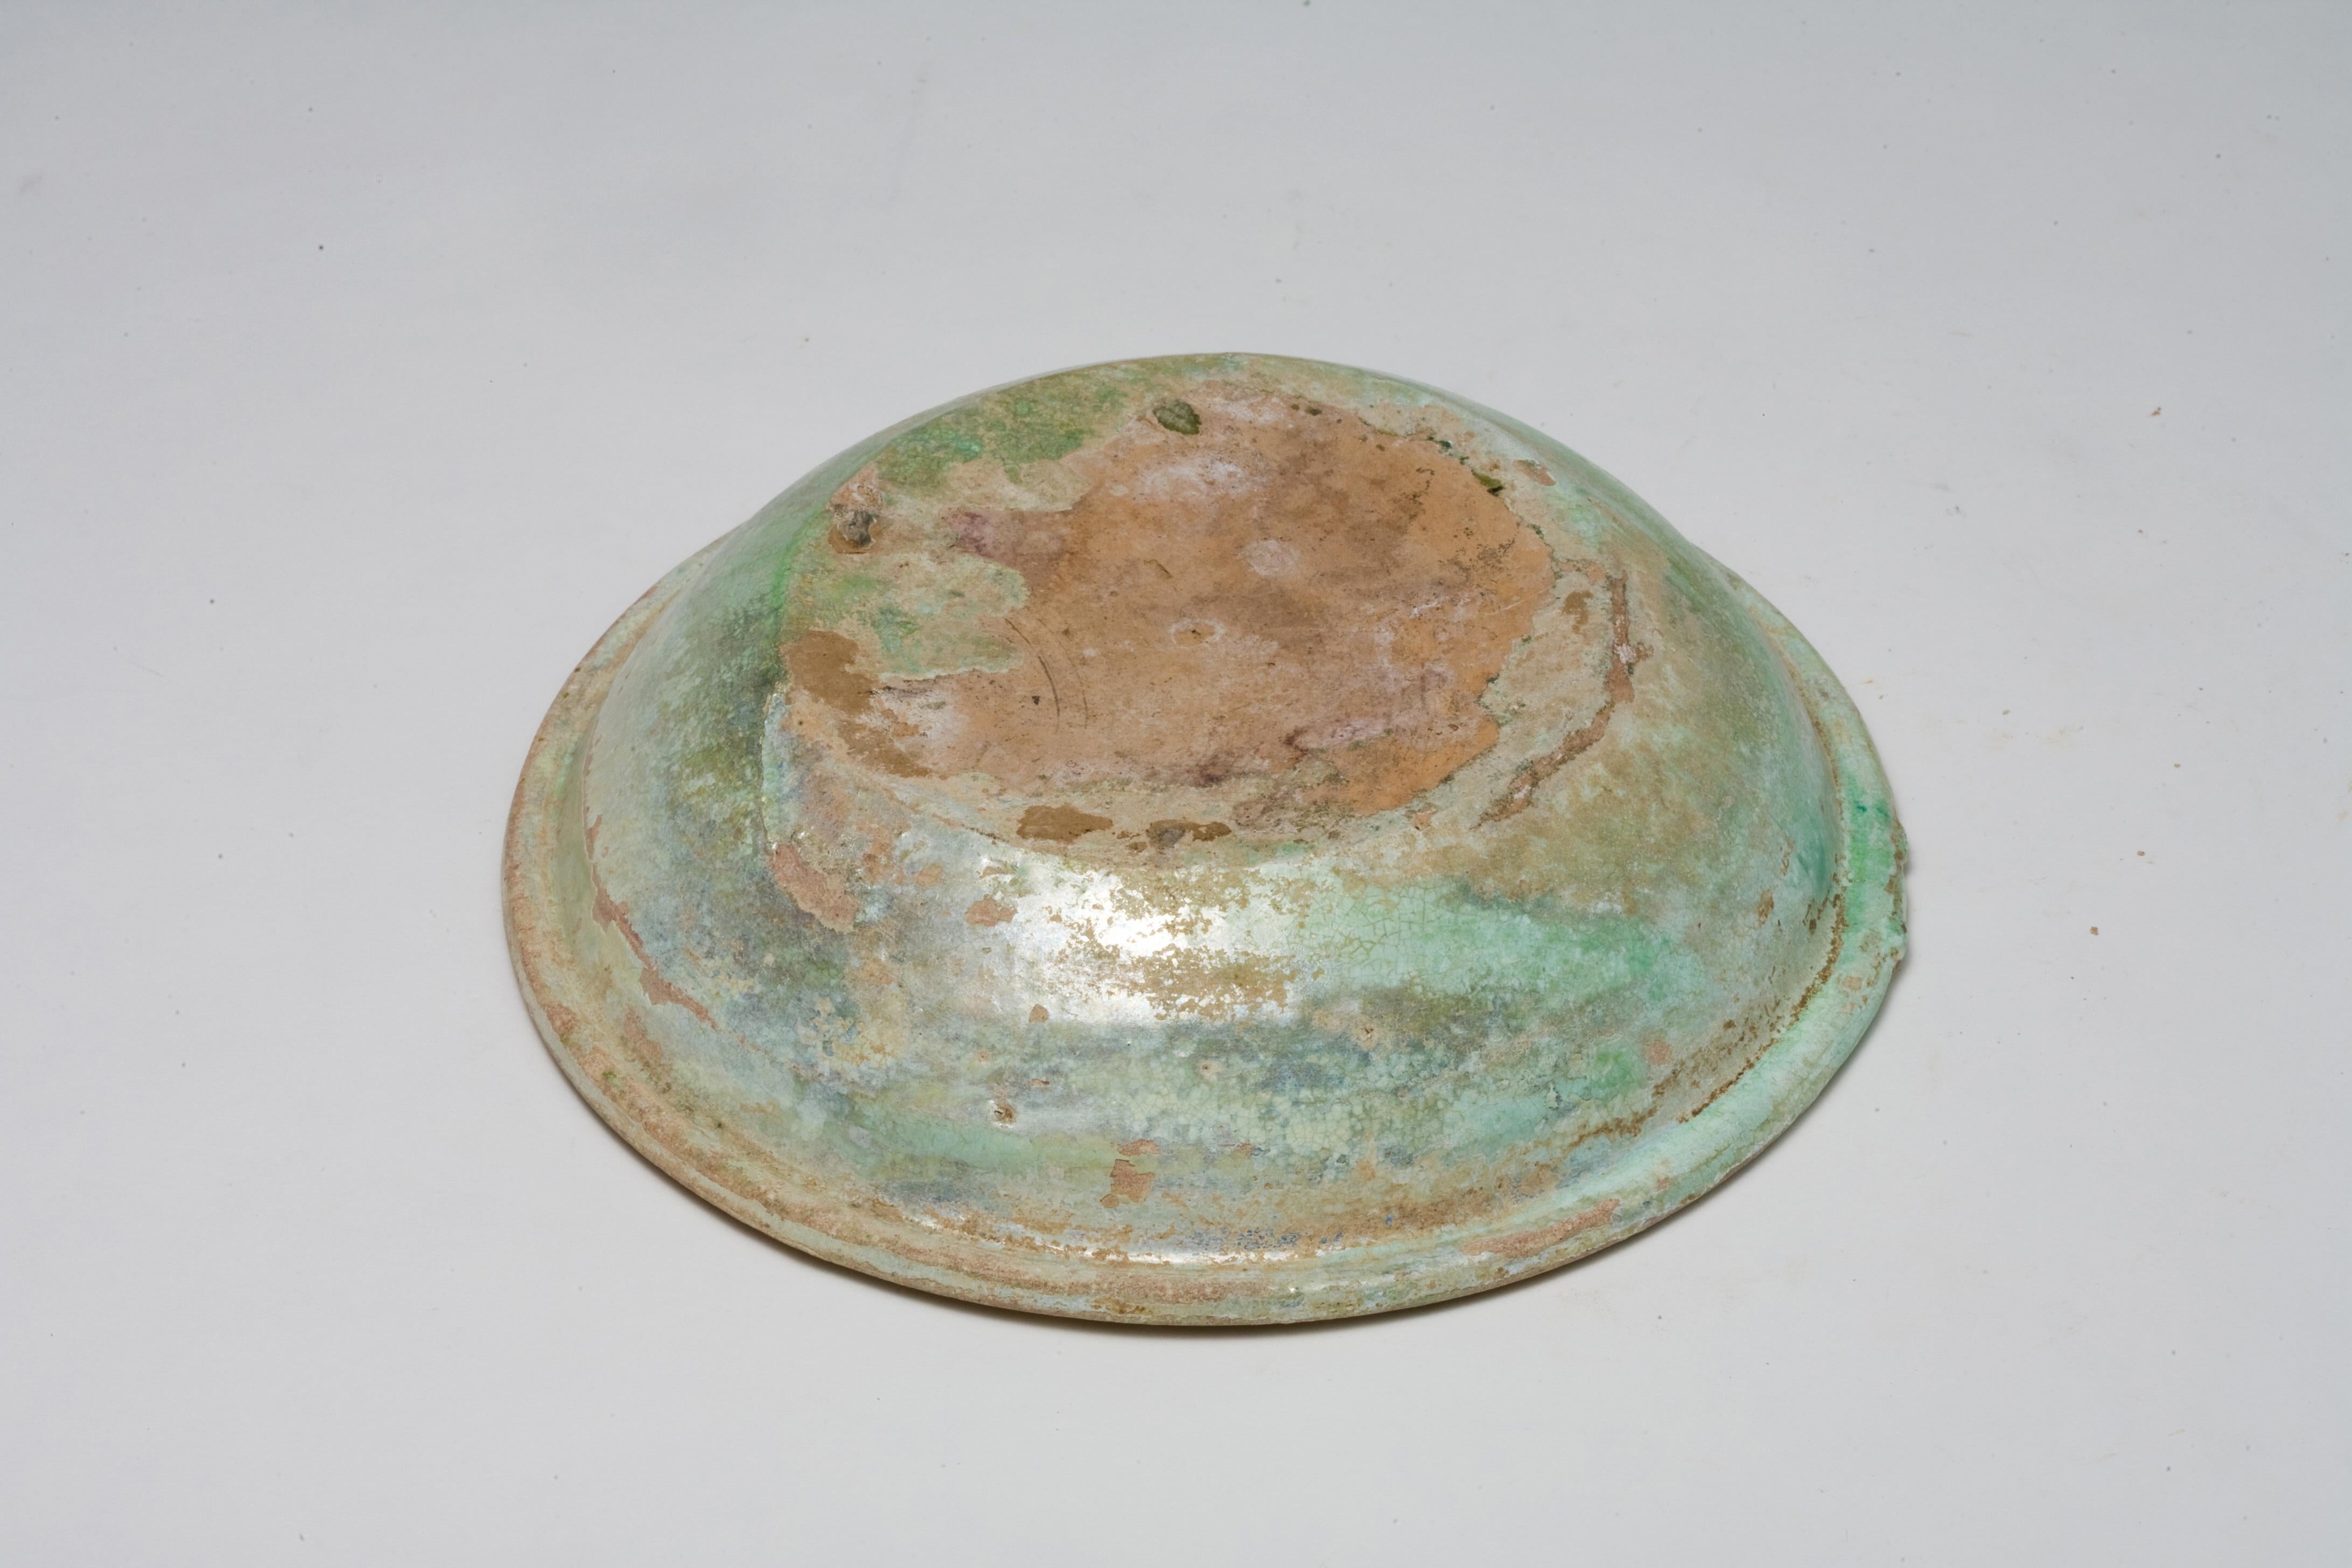 This Han Dynasty green-glazed dish exhibits significant signs of wear, indicative of its age and the long passage of time it has witnessed. The glaze, once vibrant, now shows substantial corrosion and deterioration, revealing the delicate nature of